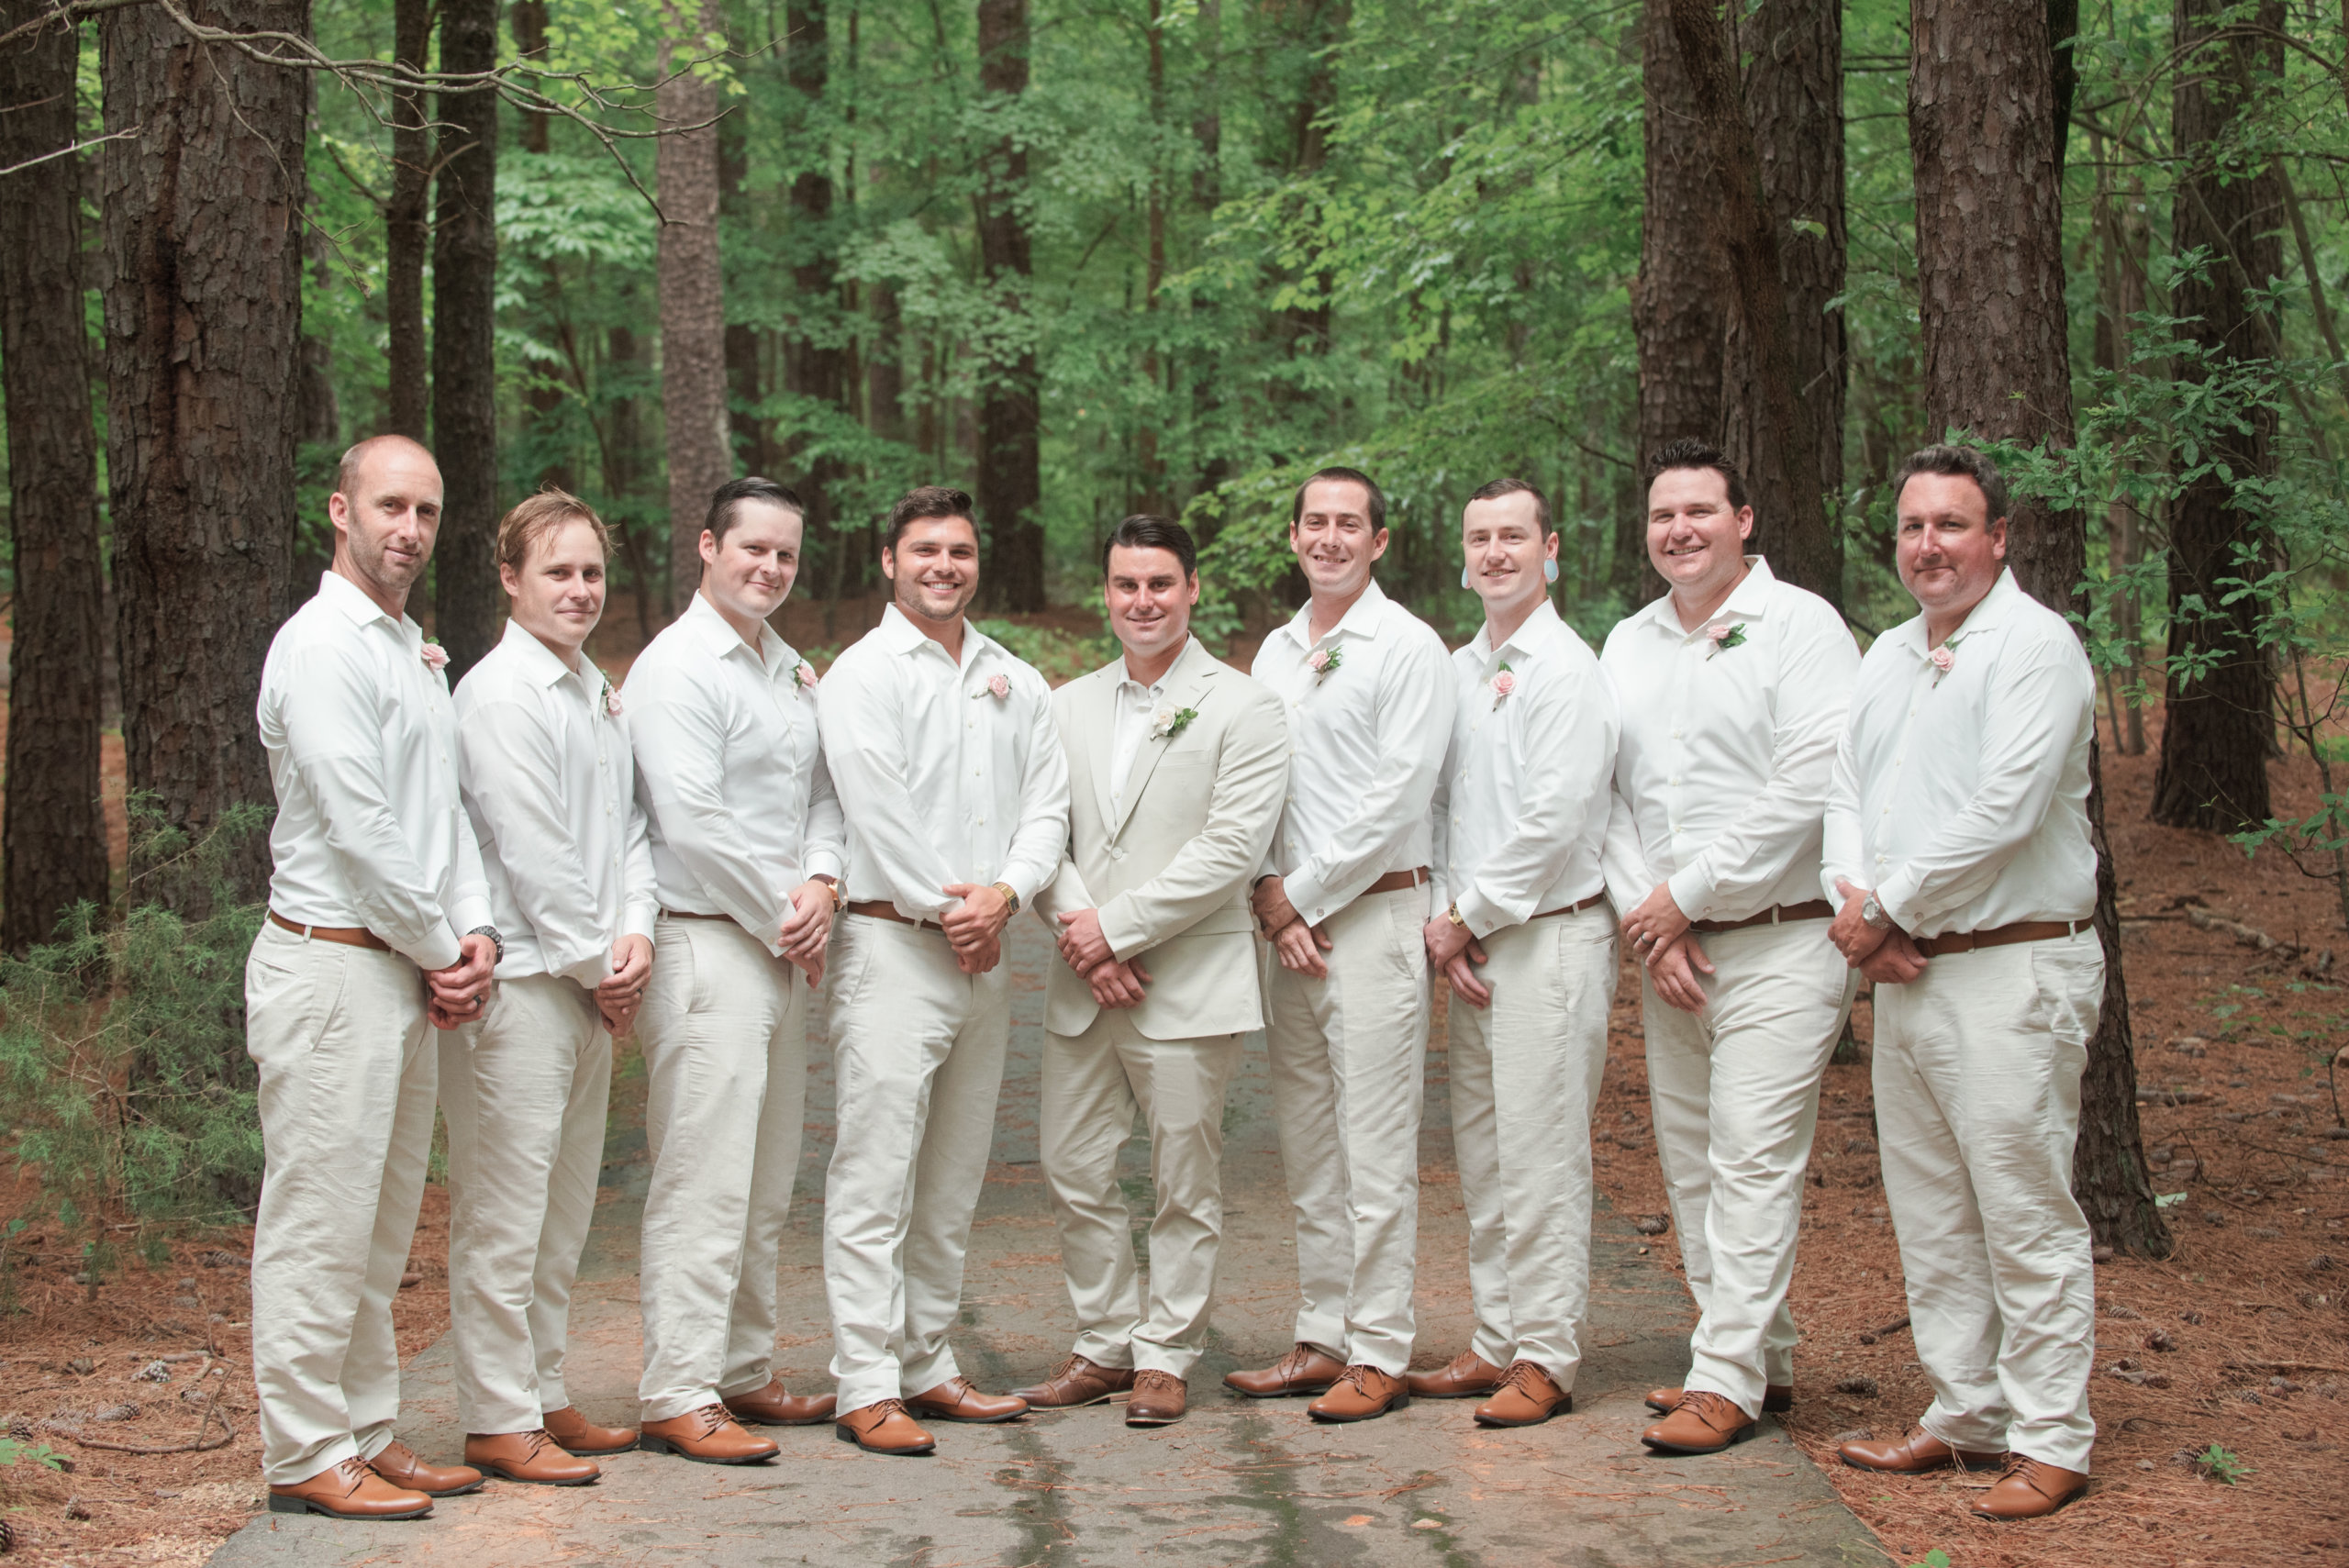 Groom and groomsmen in white button up shirts and khaki pants